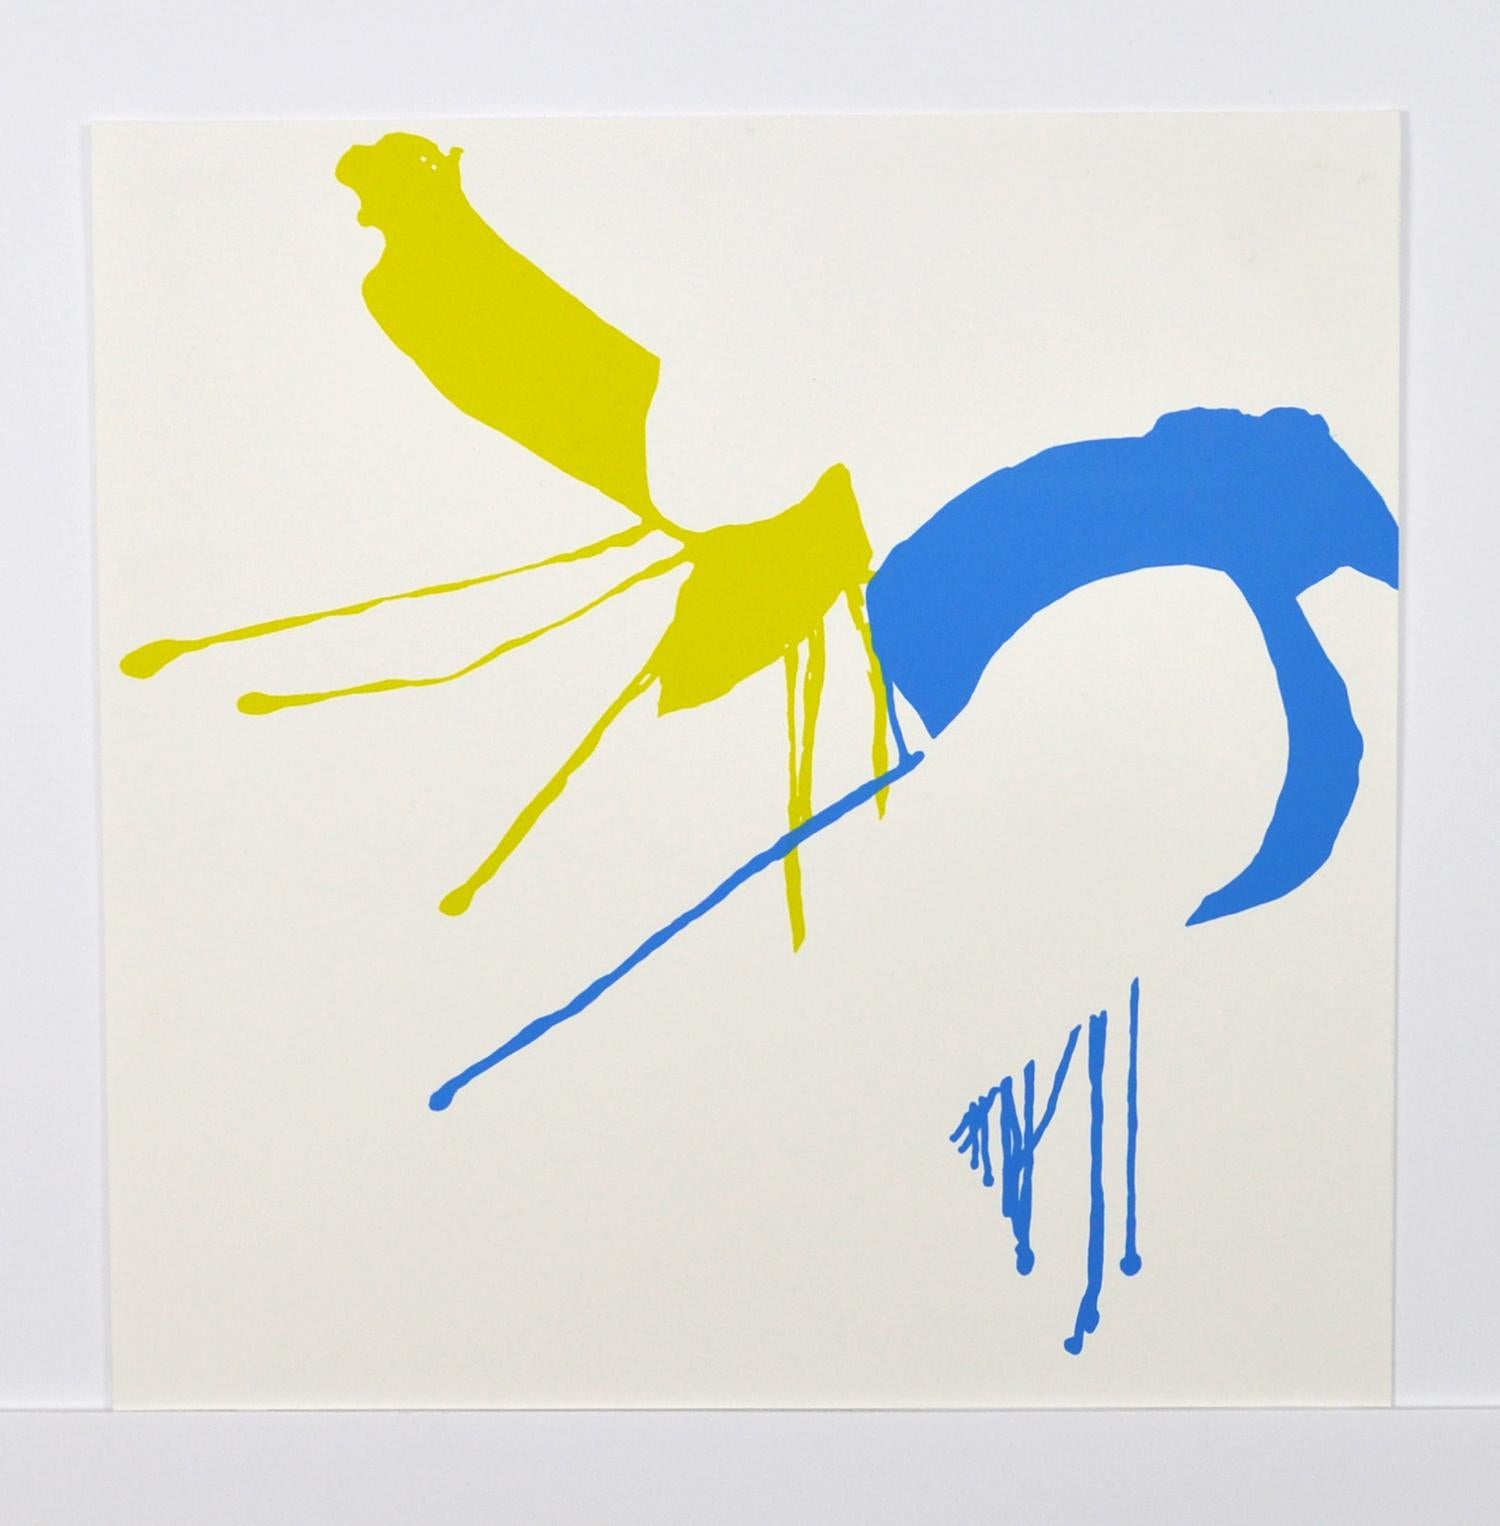 Scandinavian Screen Print, “Kitanoumi Toshimitsu, Sumo 8” , numbered and signed - Gray Abstract Print by Anne Marie Ploug